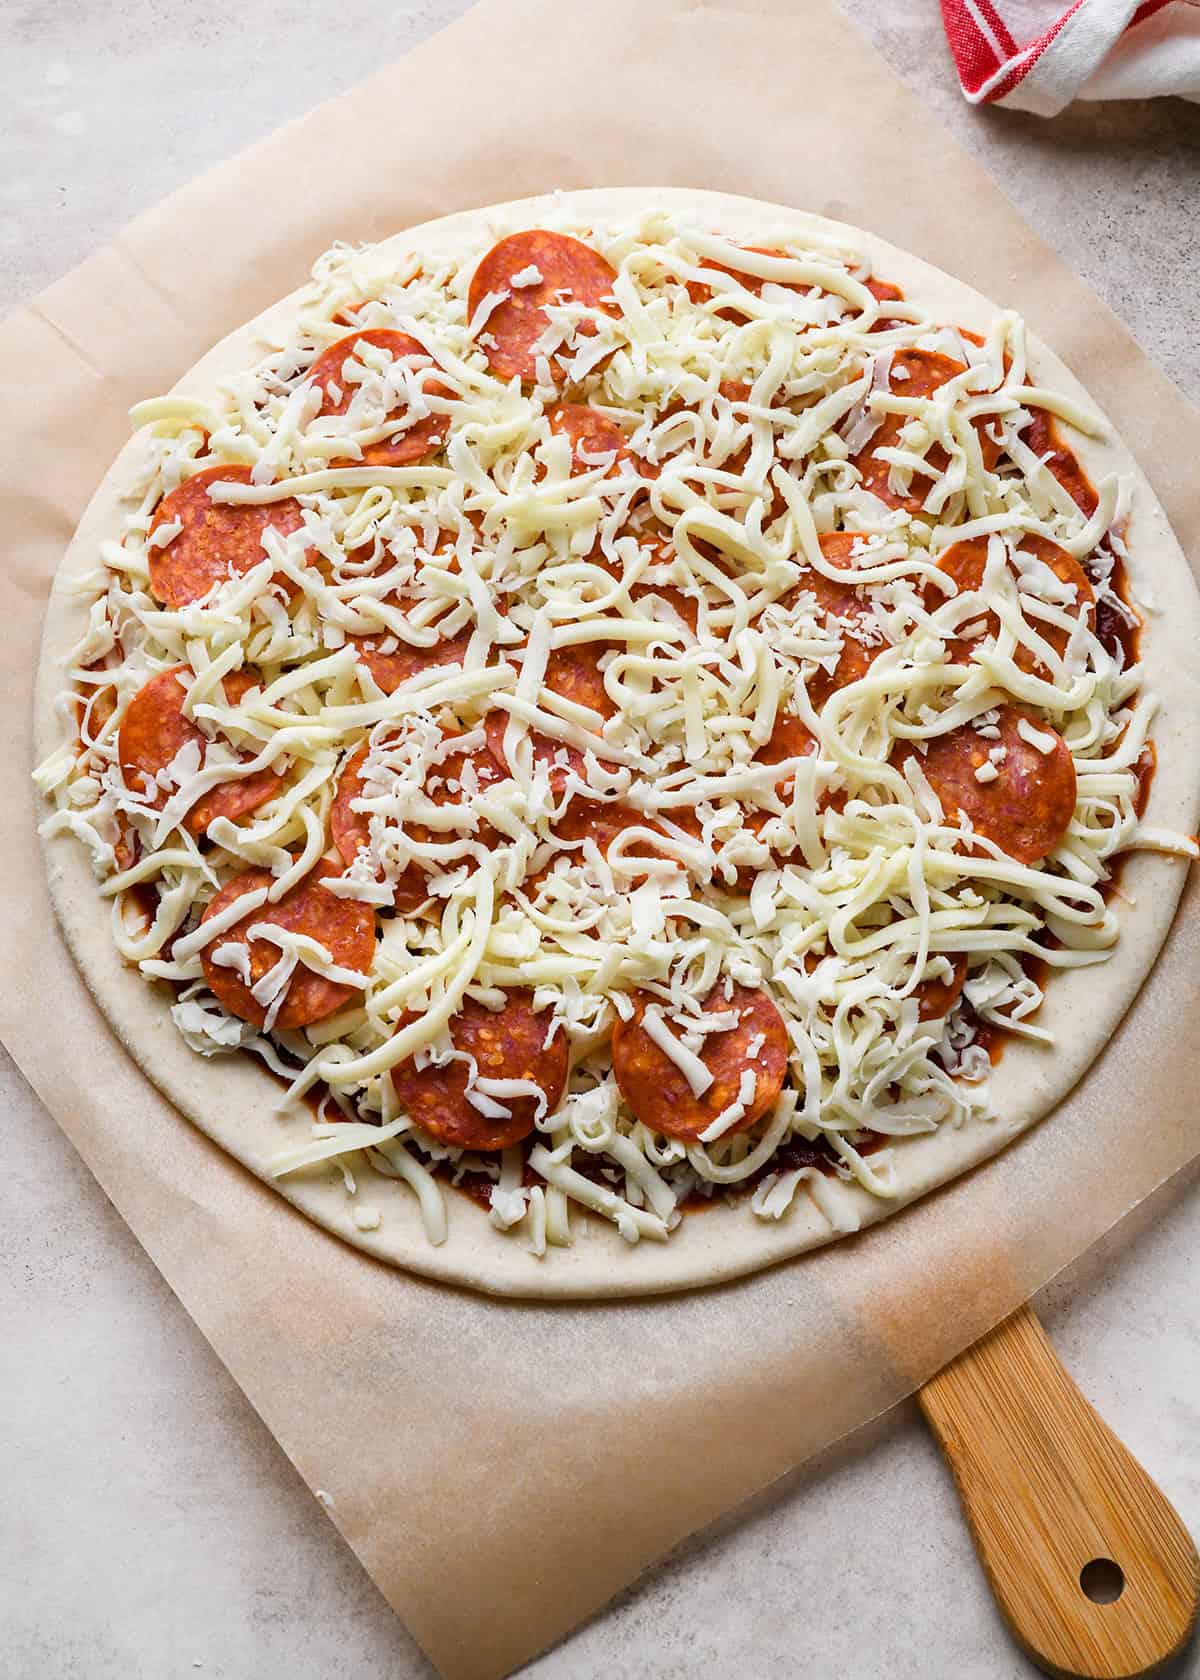 pepperoni pizza on a pizza peel before baking